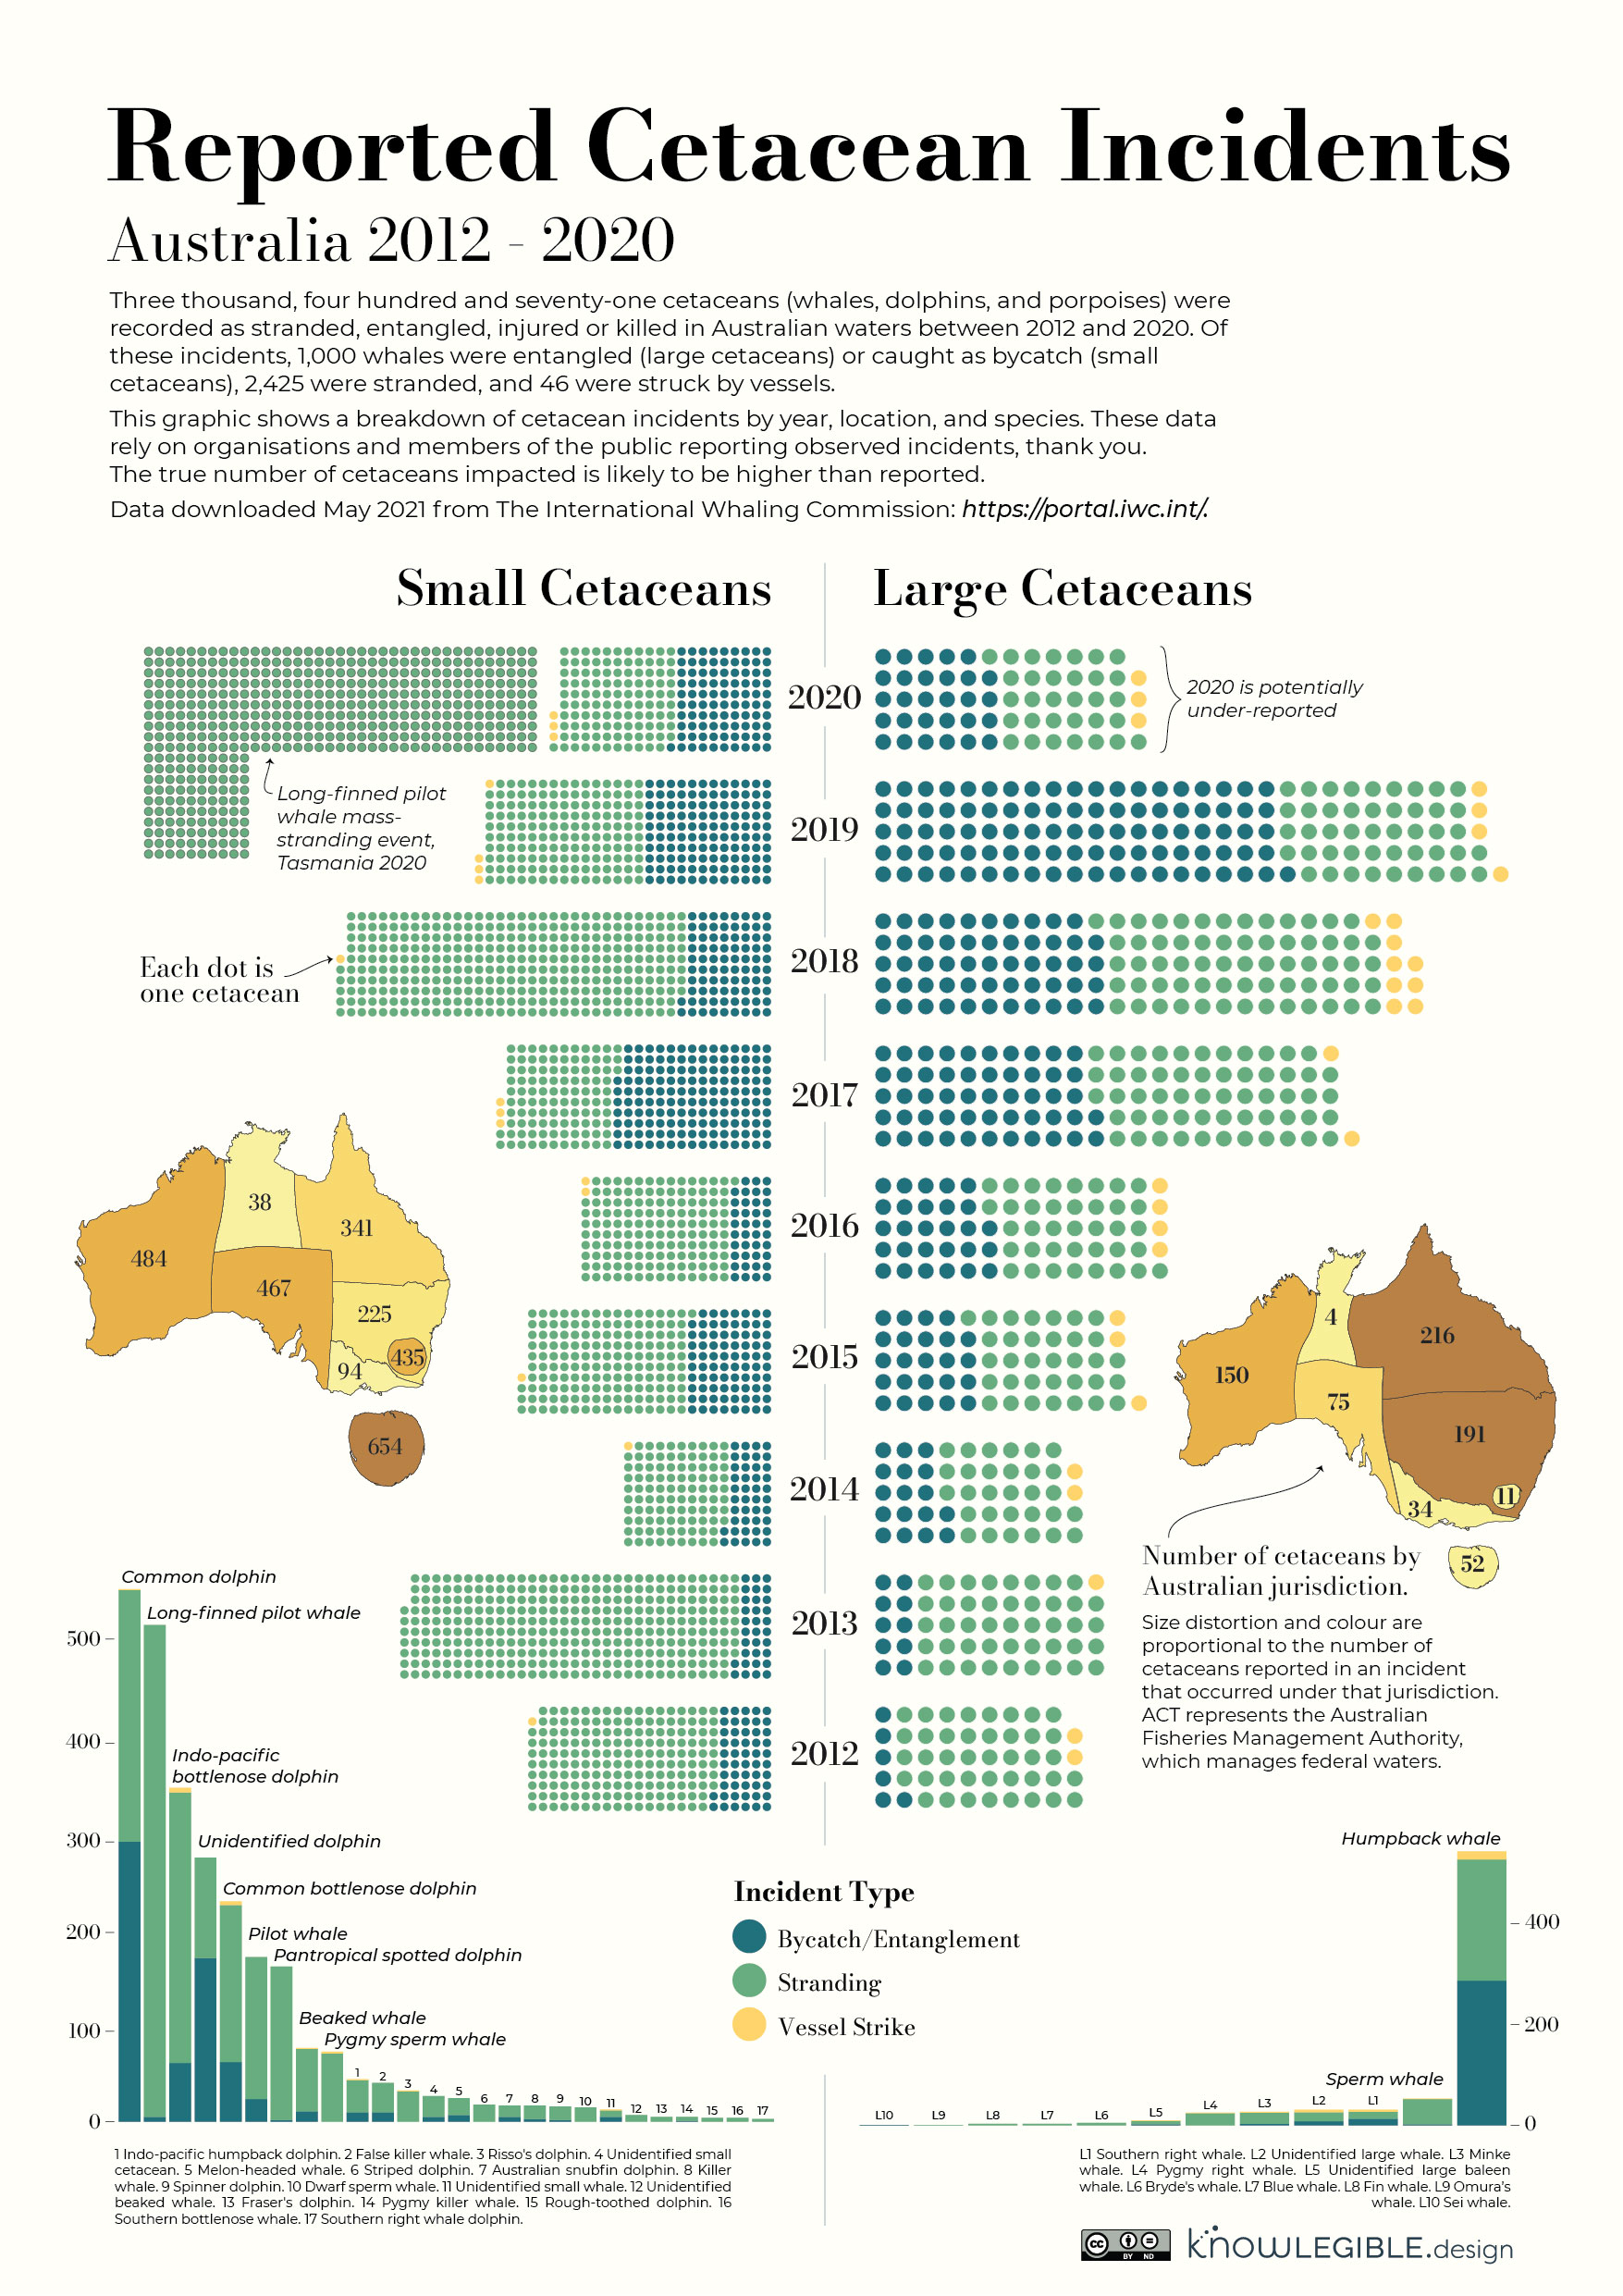 Inforgraphic showing the reported whale incidents in Australia between 2012 and 2020